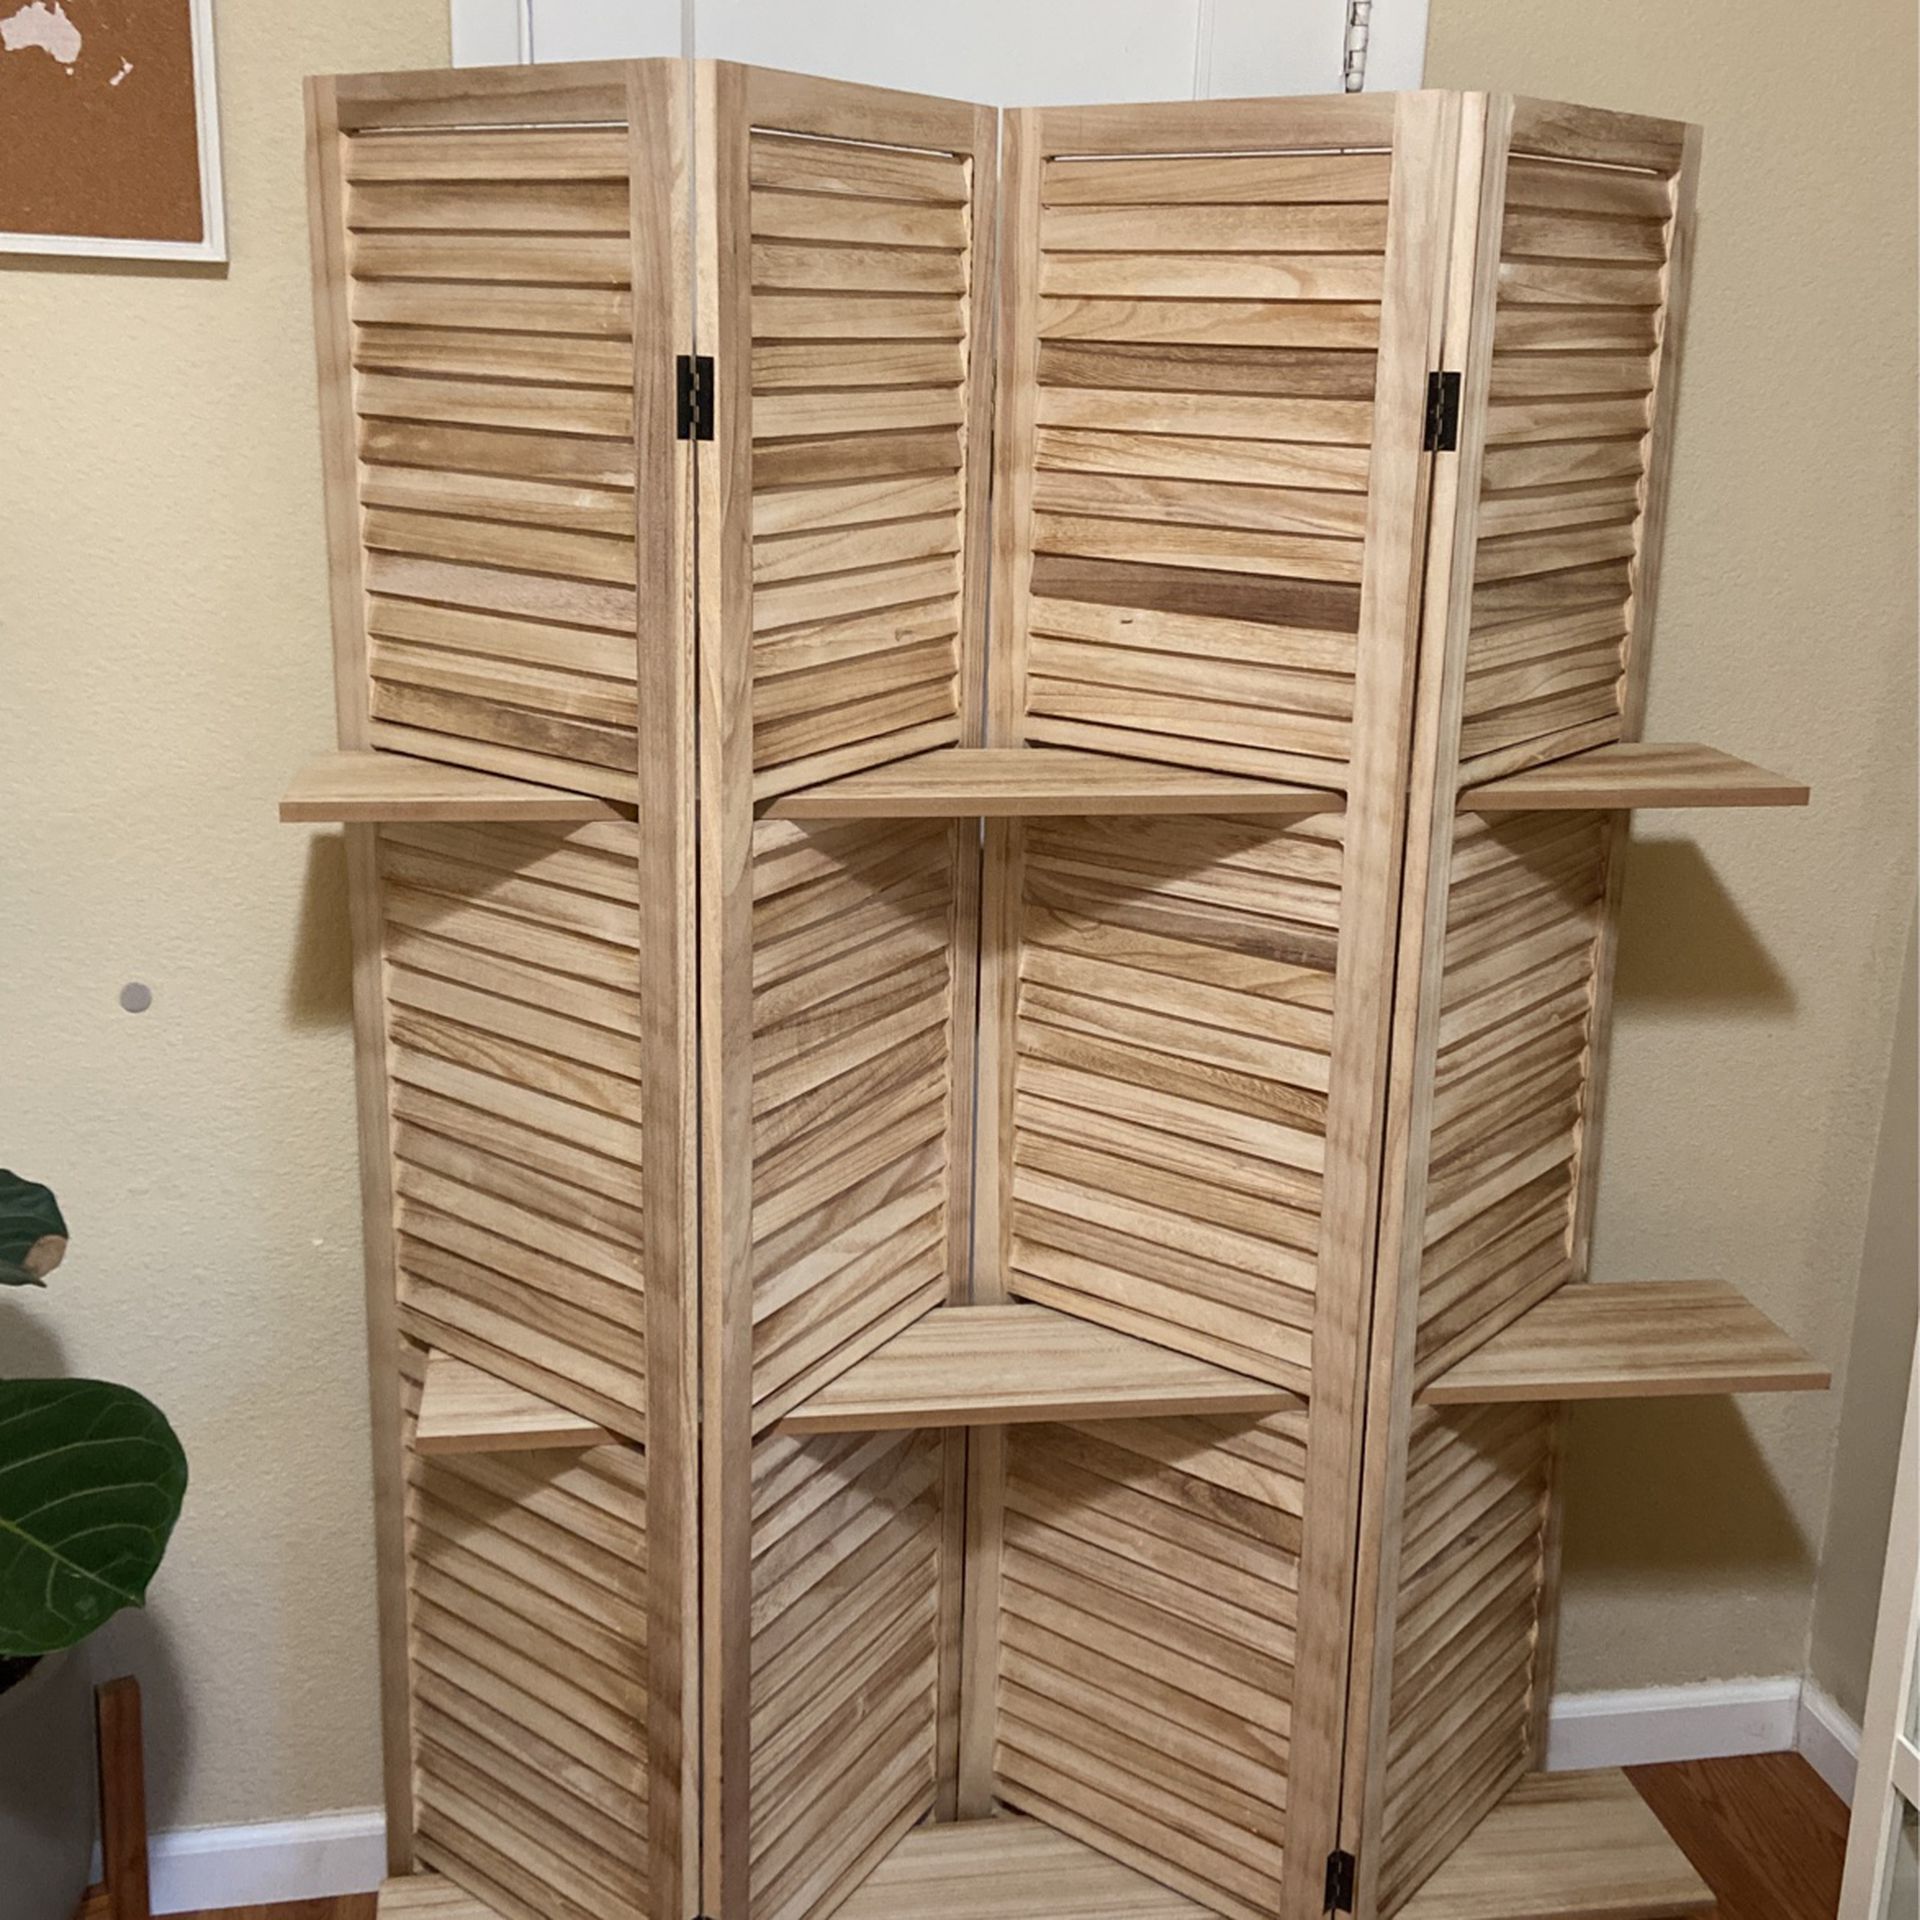 Wooden Room Divider With Shelves